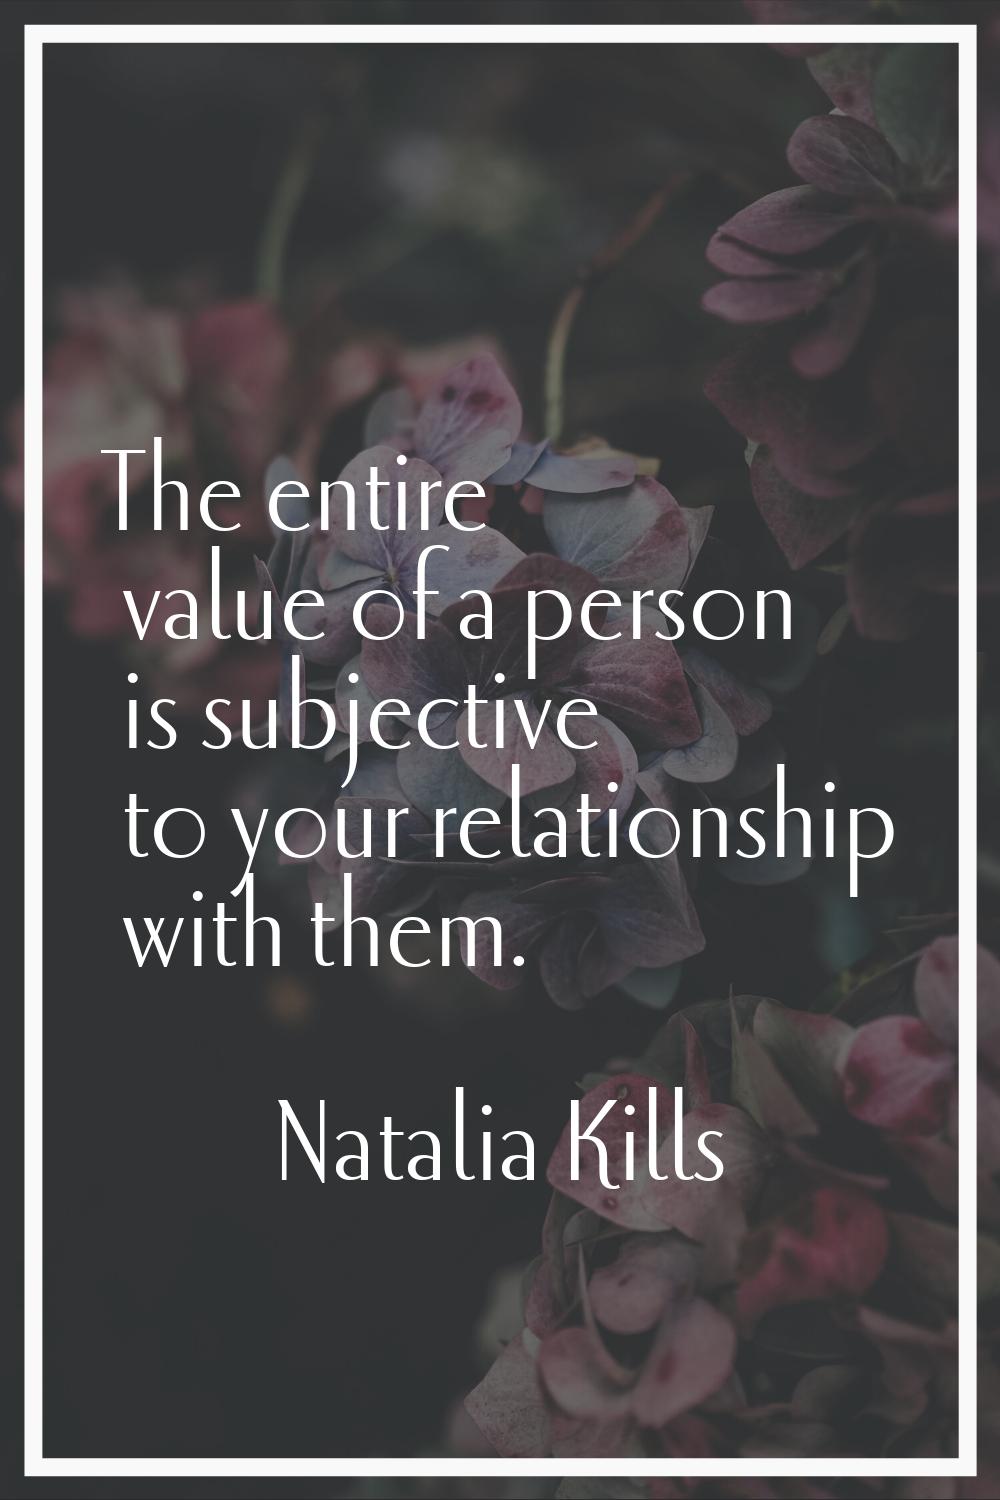 The entire value of a person is subjective to your relationship with them.